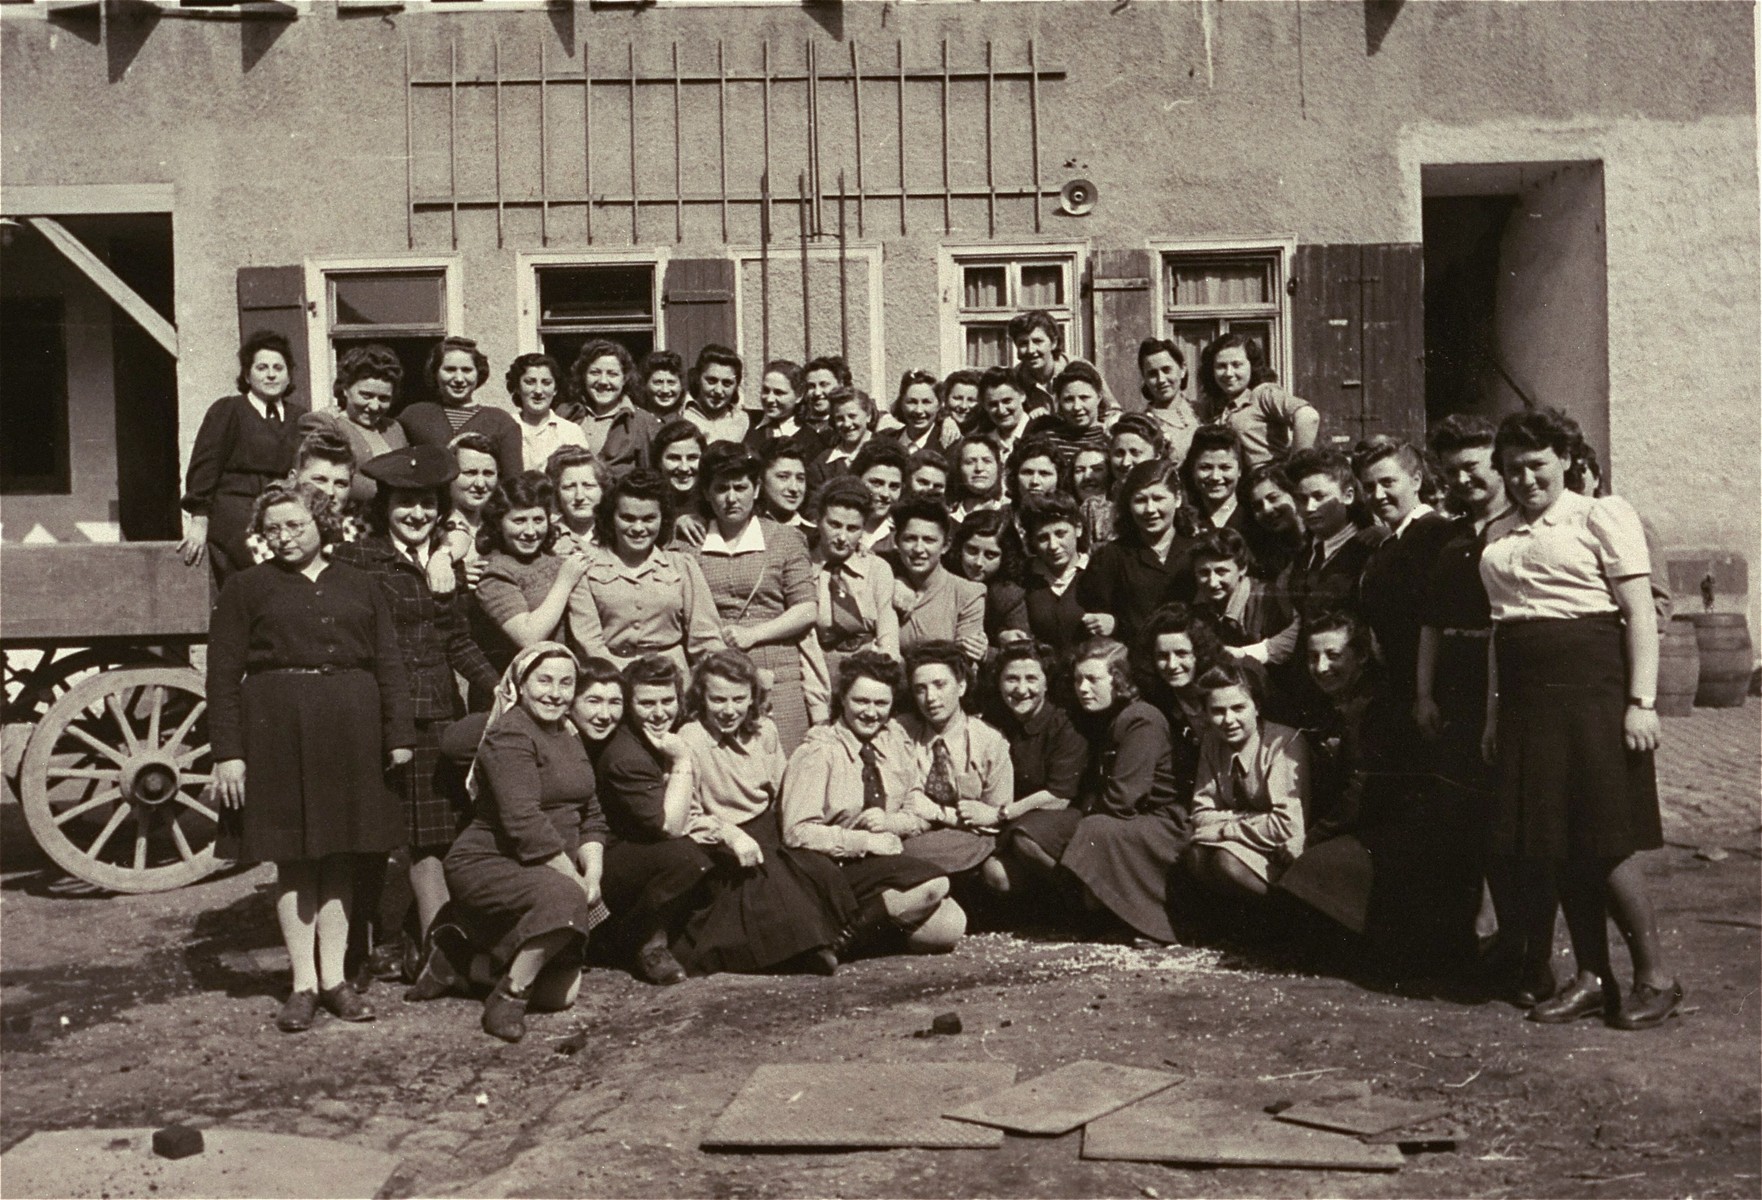 Group portrait of members of the hachshara kibbutz [agricultural training farm] "Kibbutz Negev" in the Zeilsheim displaced person's camp.